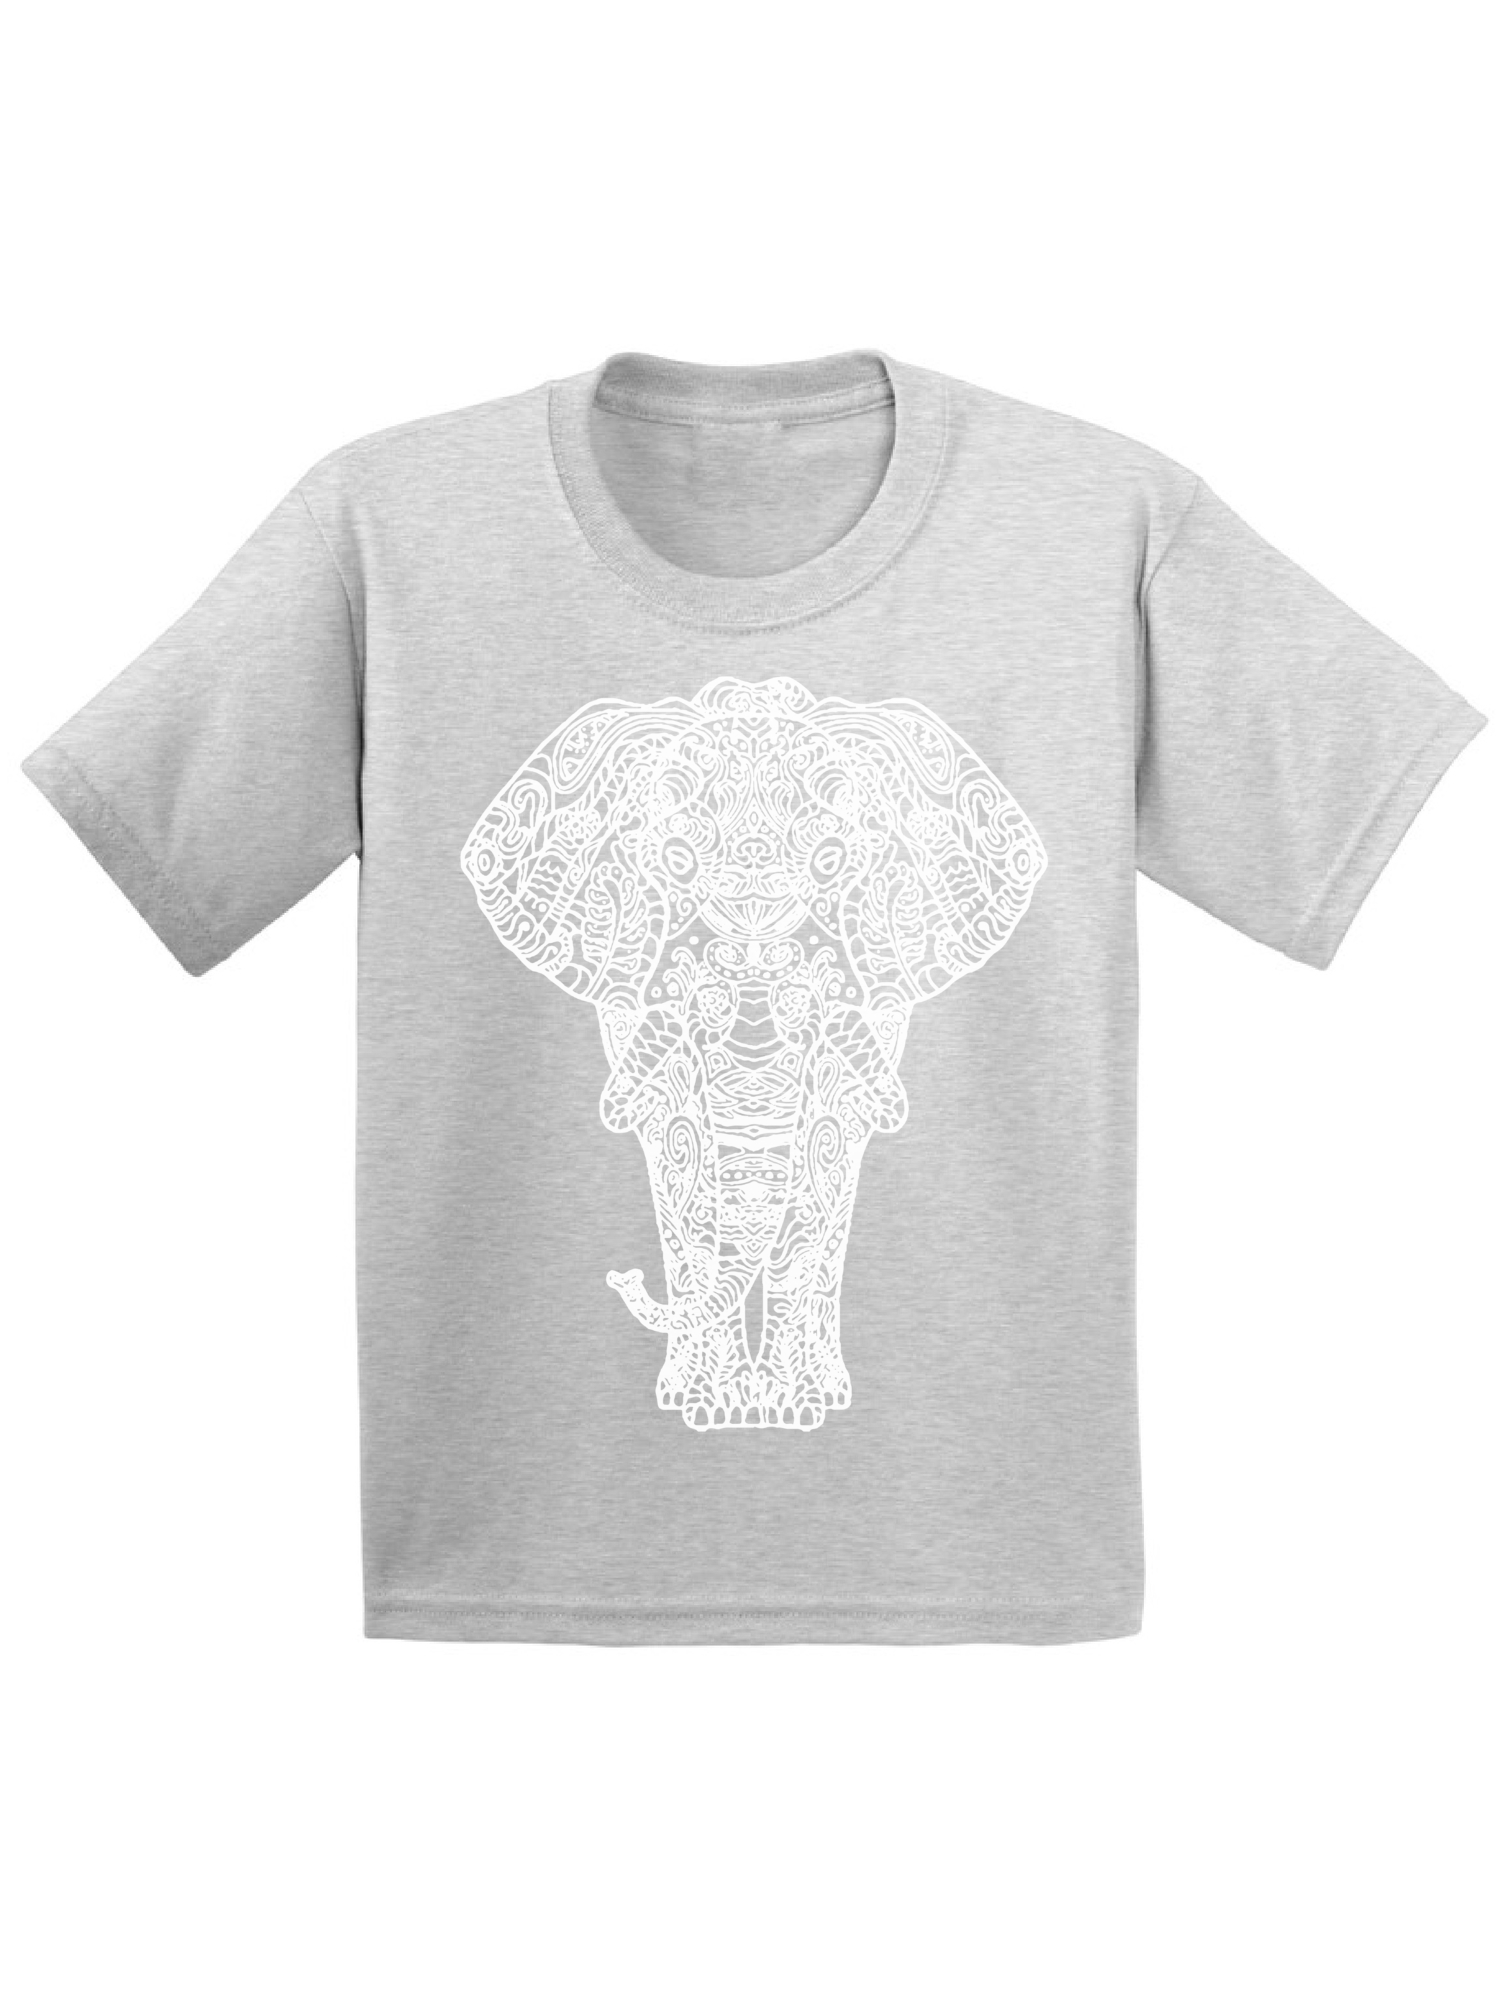 Awkward Styles Elephant Youth T Shirt Patterned Shirts for Kids Tracery Tshirt for Children Indian Pattern T-Shirt for Girls Gifts for Kids Elephant Shirts for Boys Animal Unisex T-Shirt for Kids - image 1 of 4